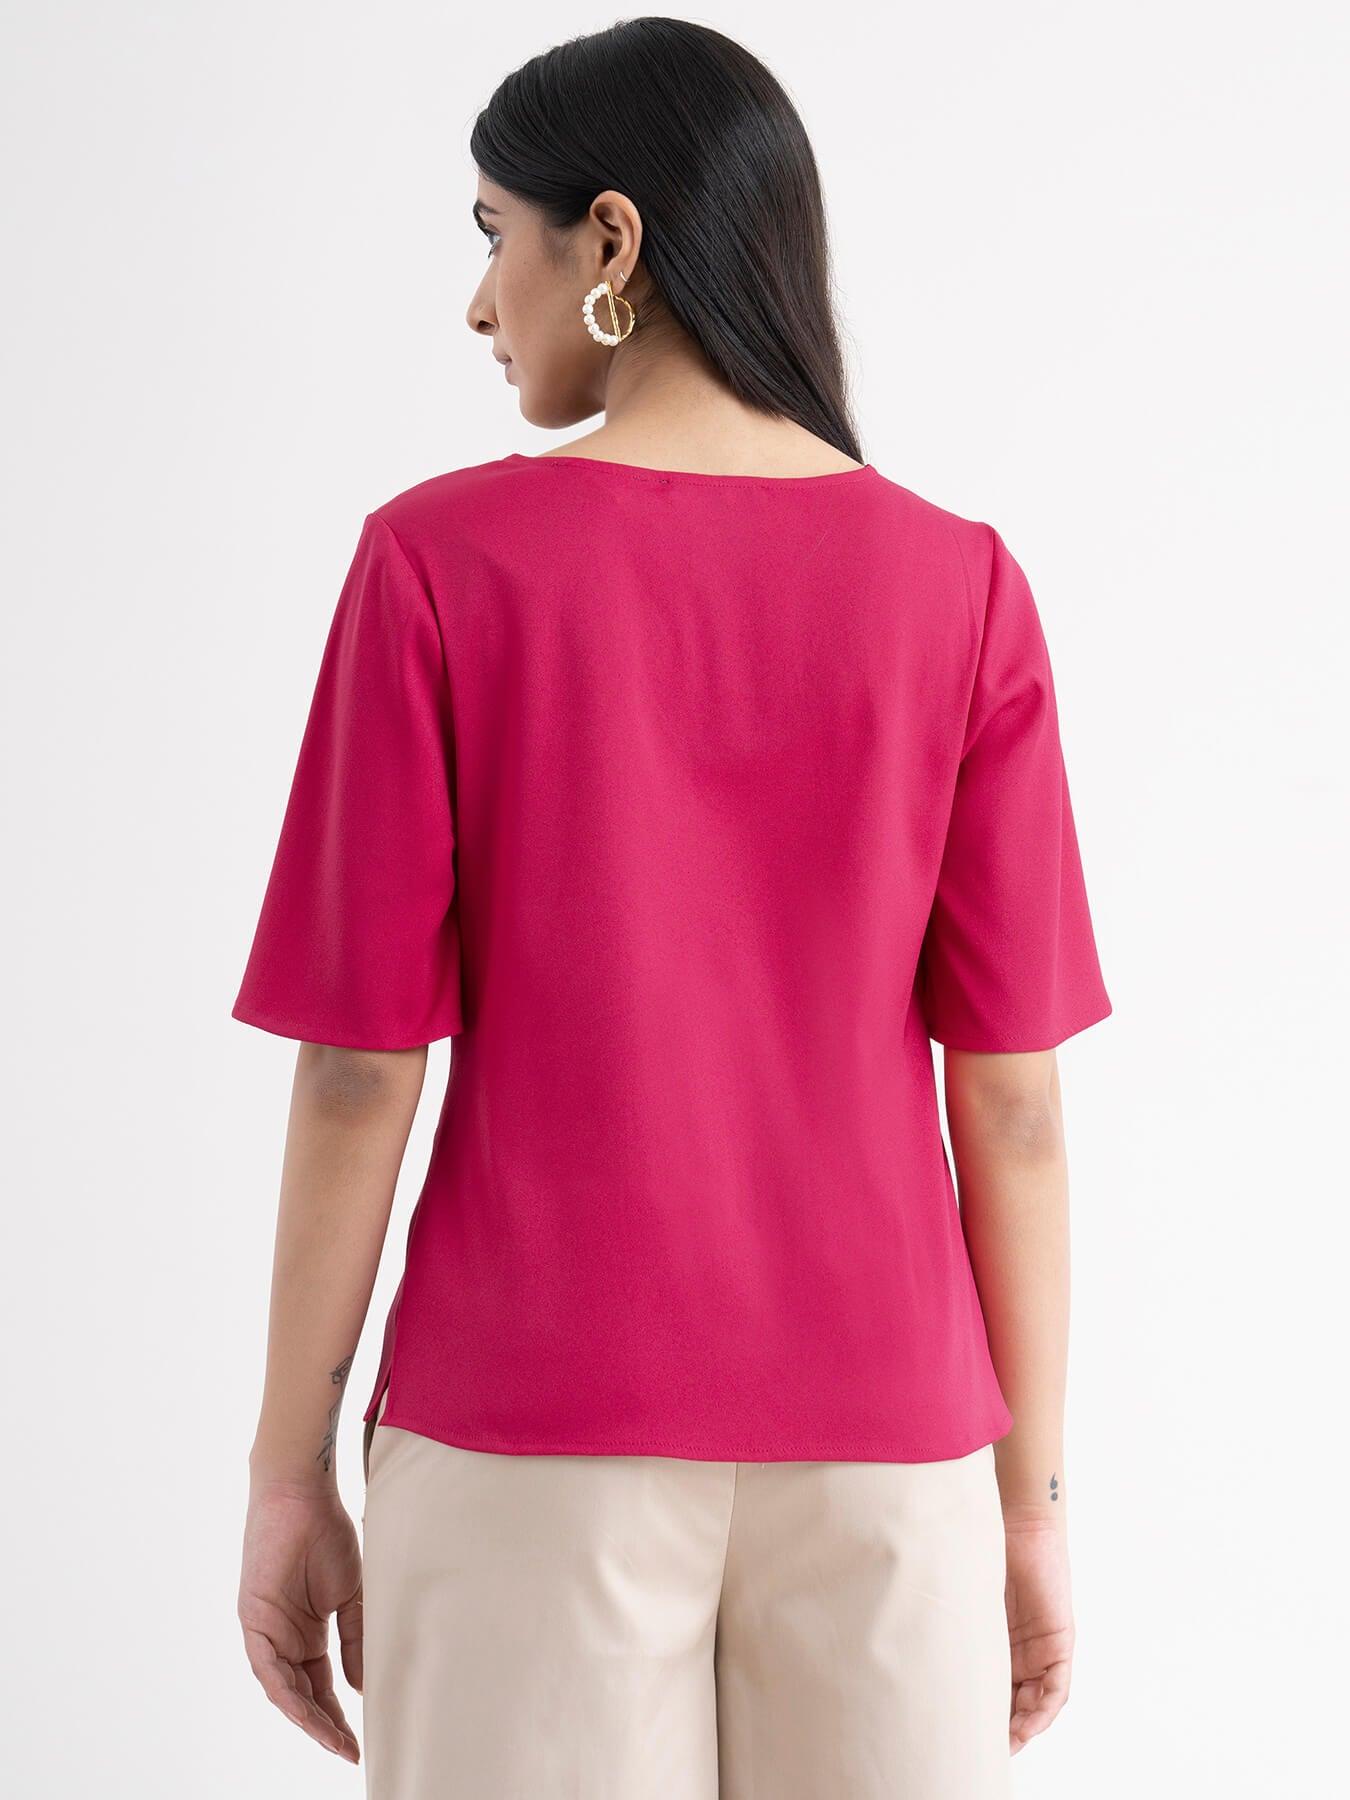 Bell Sleeves Top - Fuchsia| Formal Tops